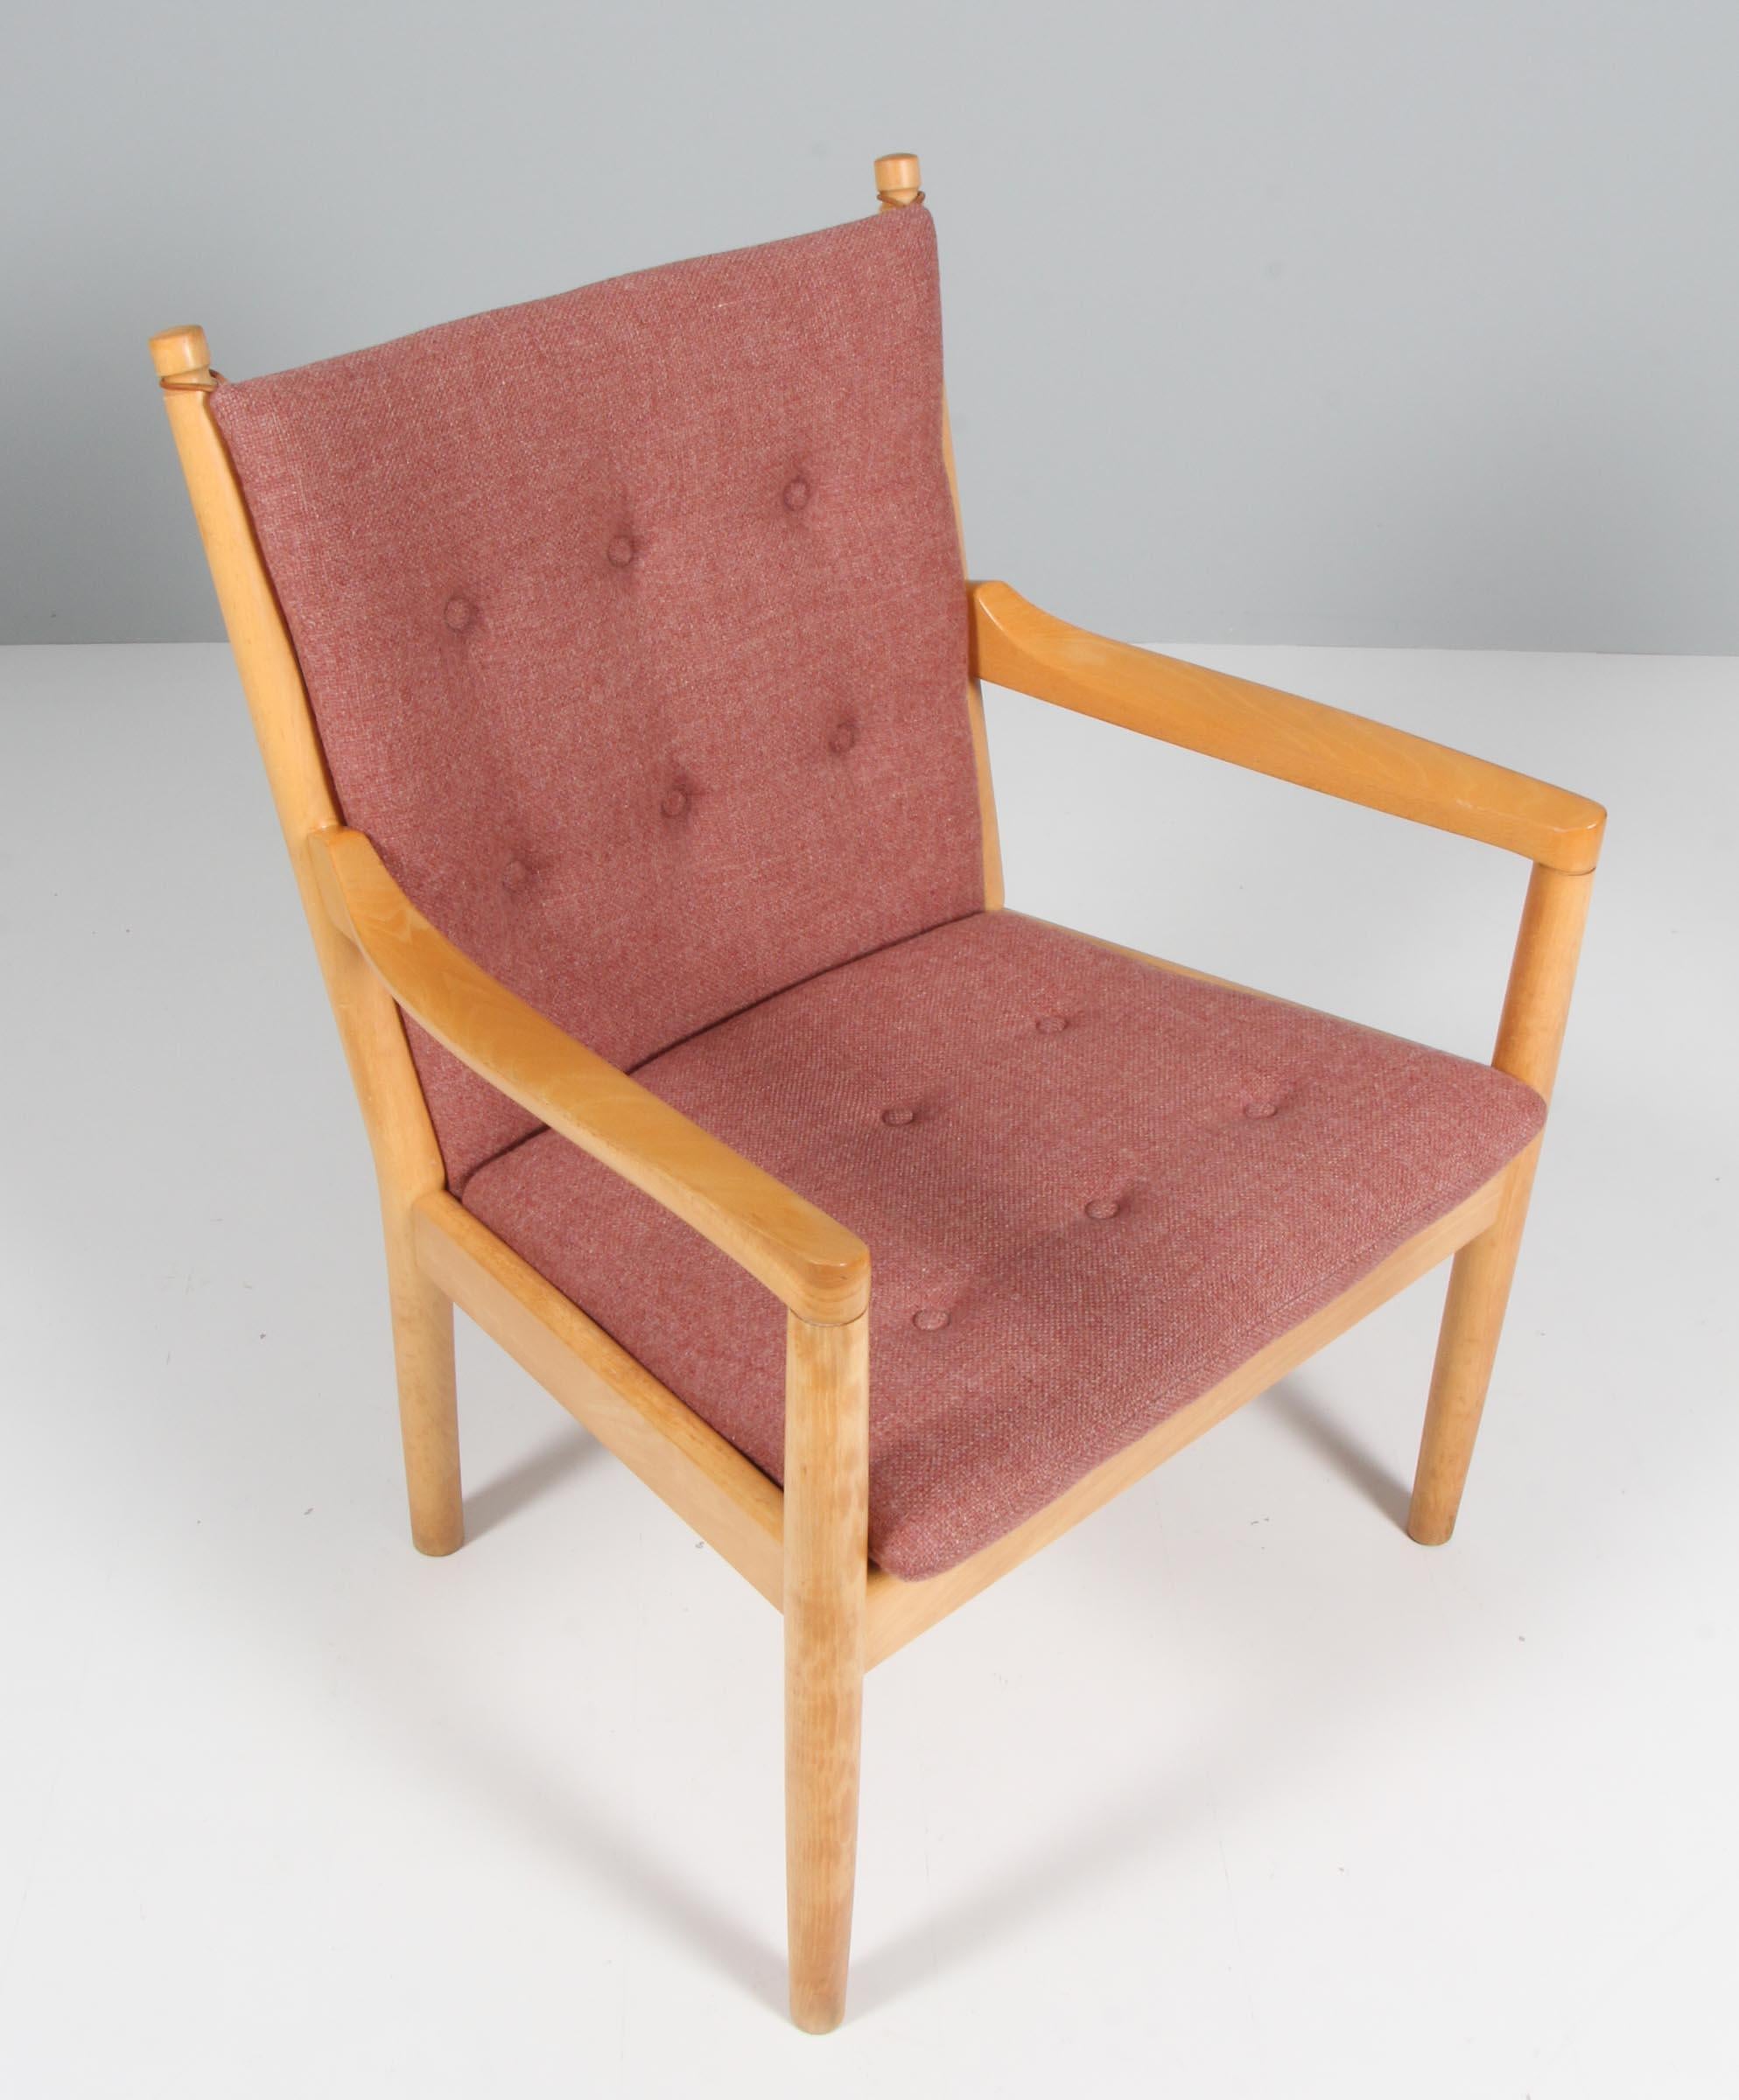 Hans Wegner, lounge or armchair original Hallingdal Wool from Kvadrat.

Frame in solid stained beech.

Model 1788, made by Fritz Hansen.

